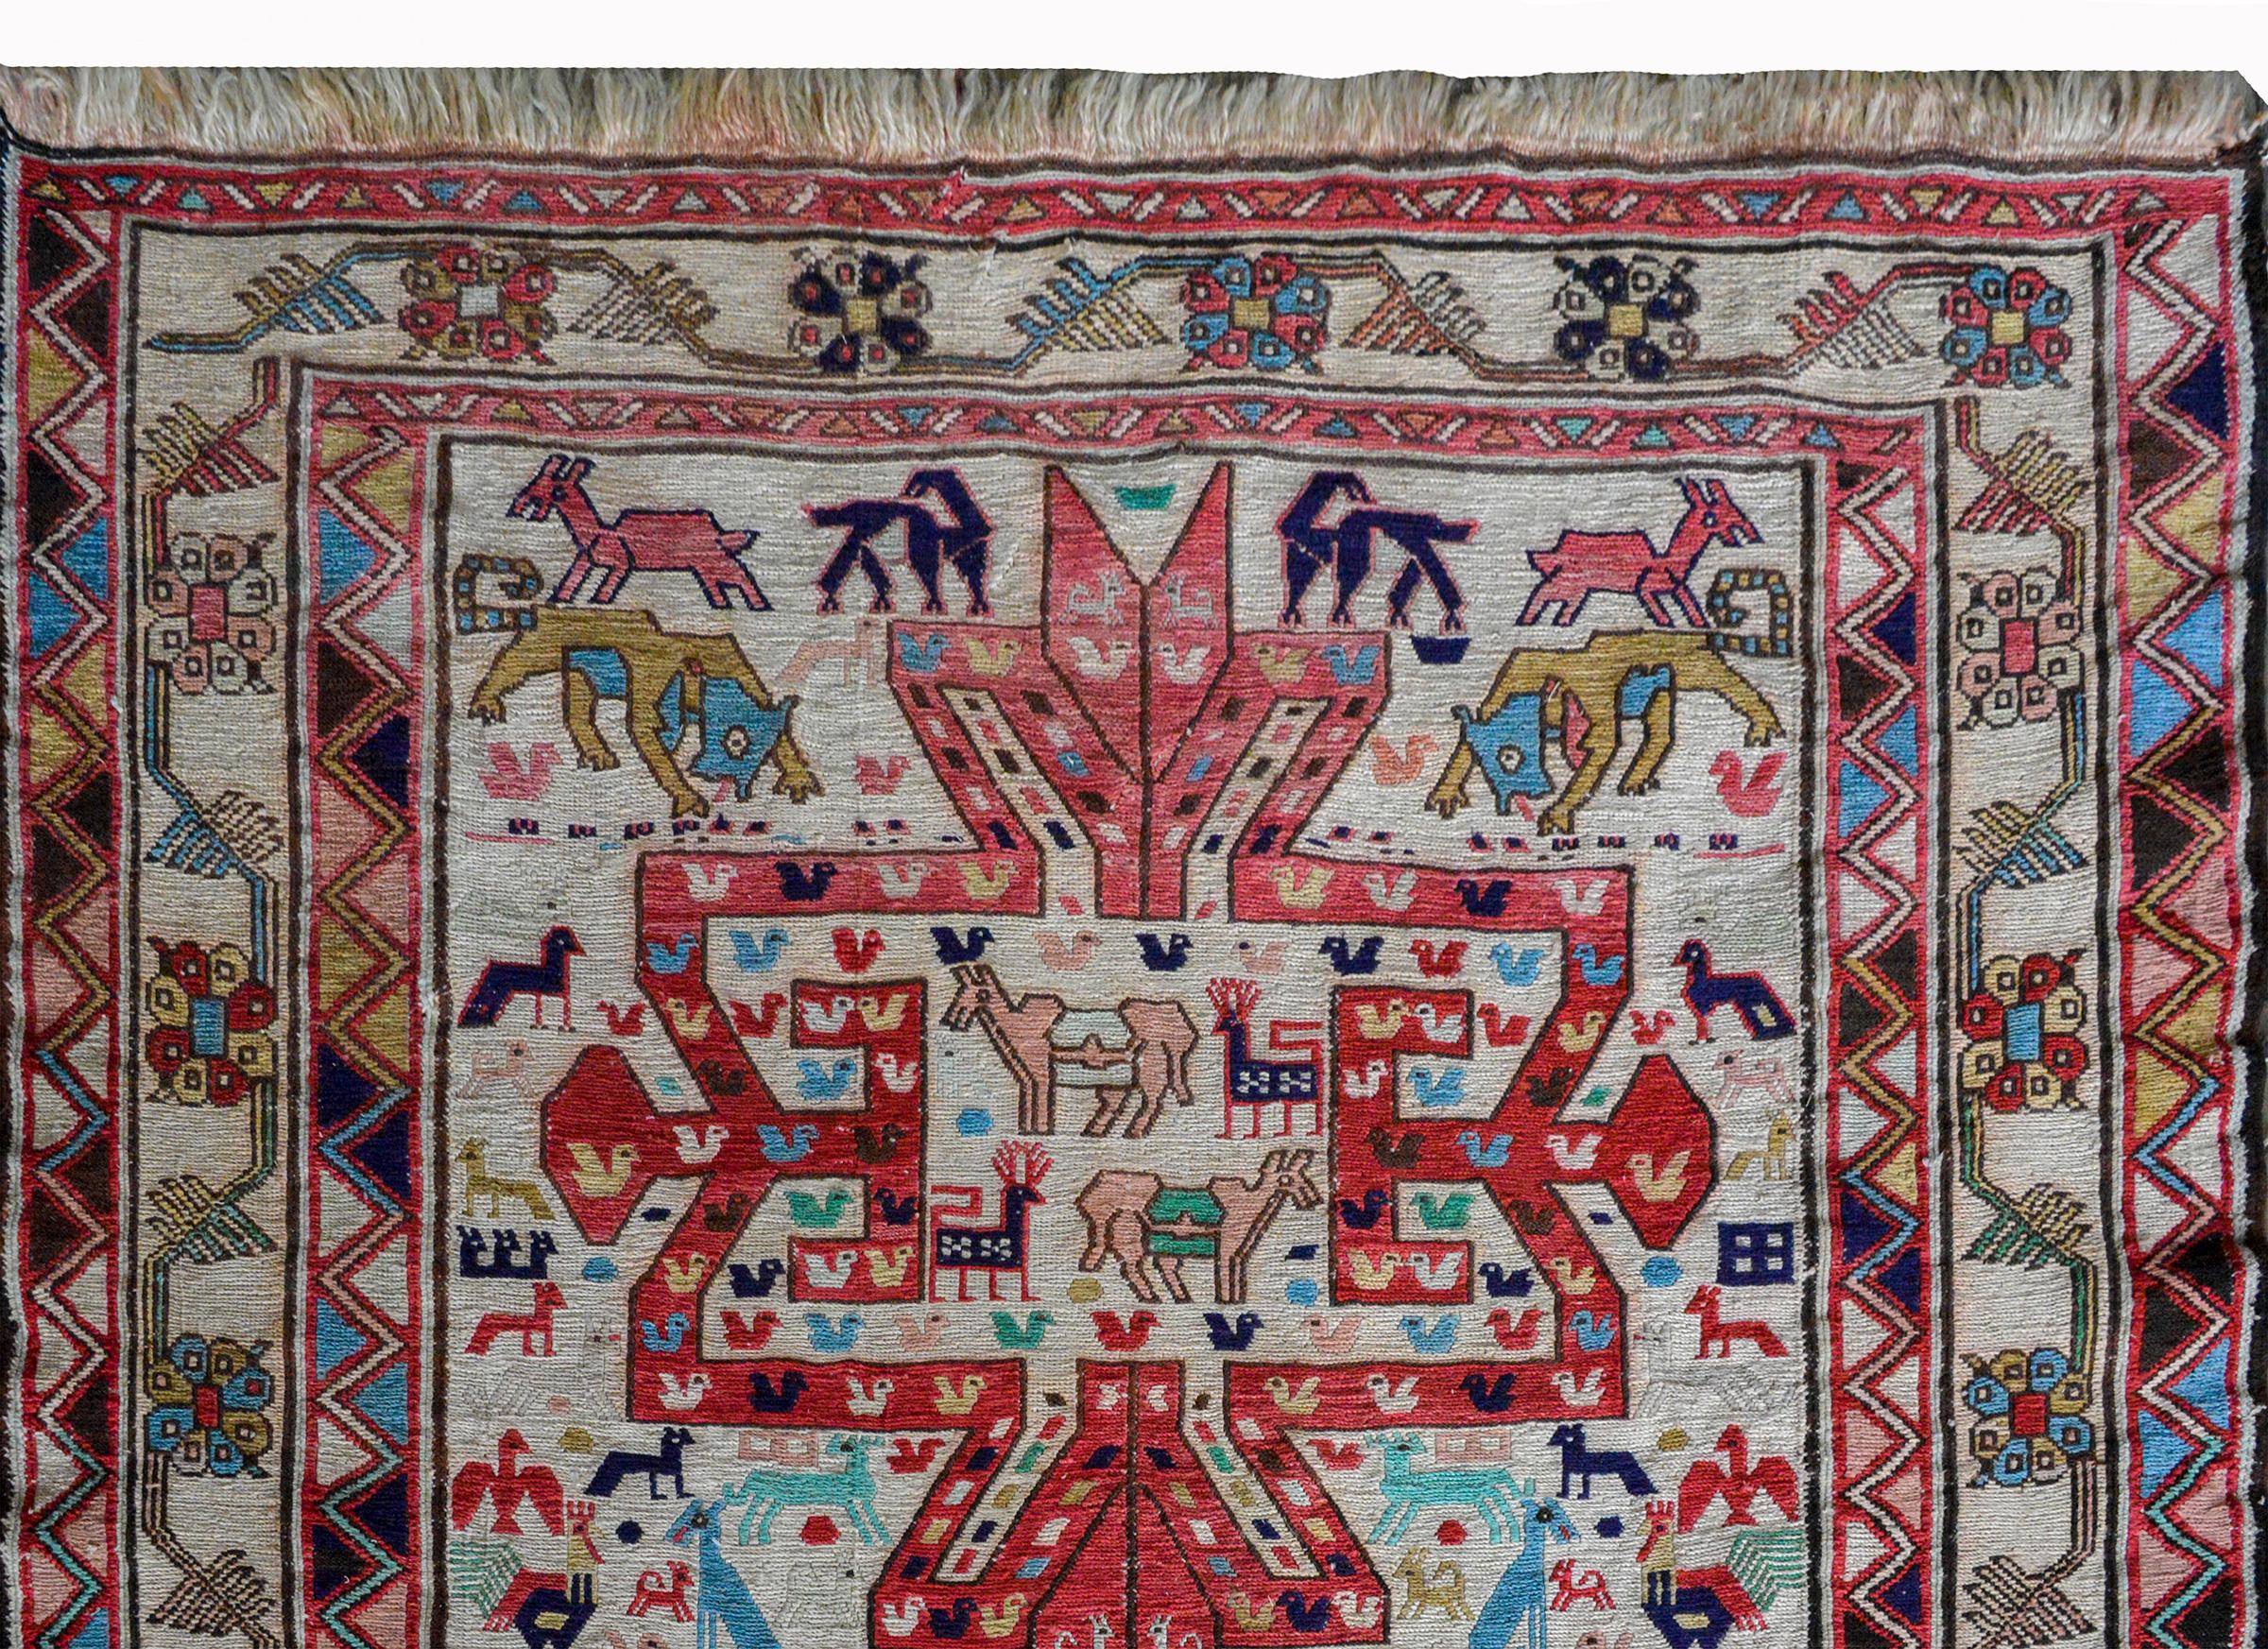 A gorgeous vintage Persian Soumak rug with mural animals including chickens, camels, lions, goats, and tigers, all woven in red, indigo, pink, green, and gold against a white background, and surrounded by wide geometric pattered borders flanking a